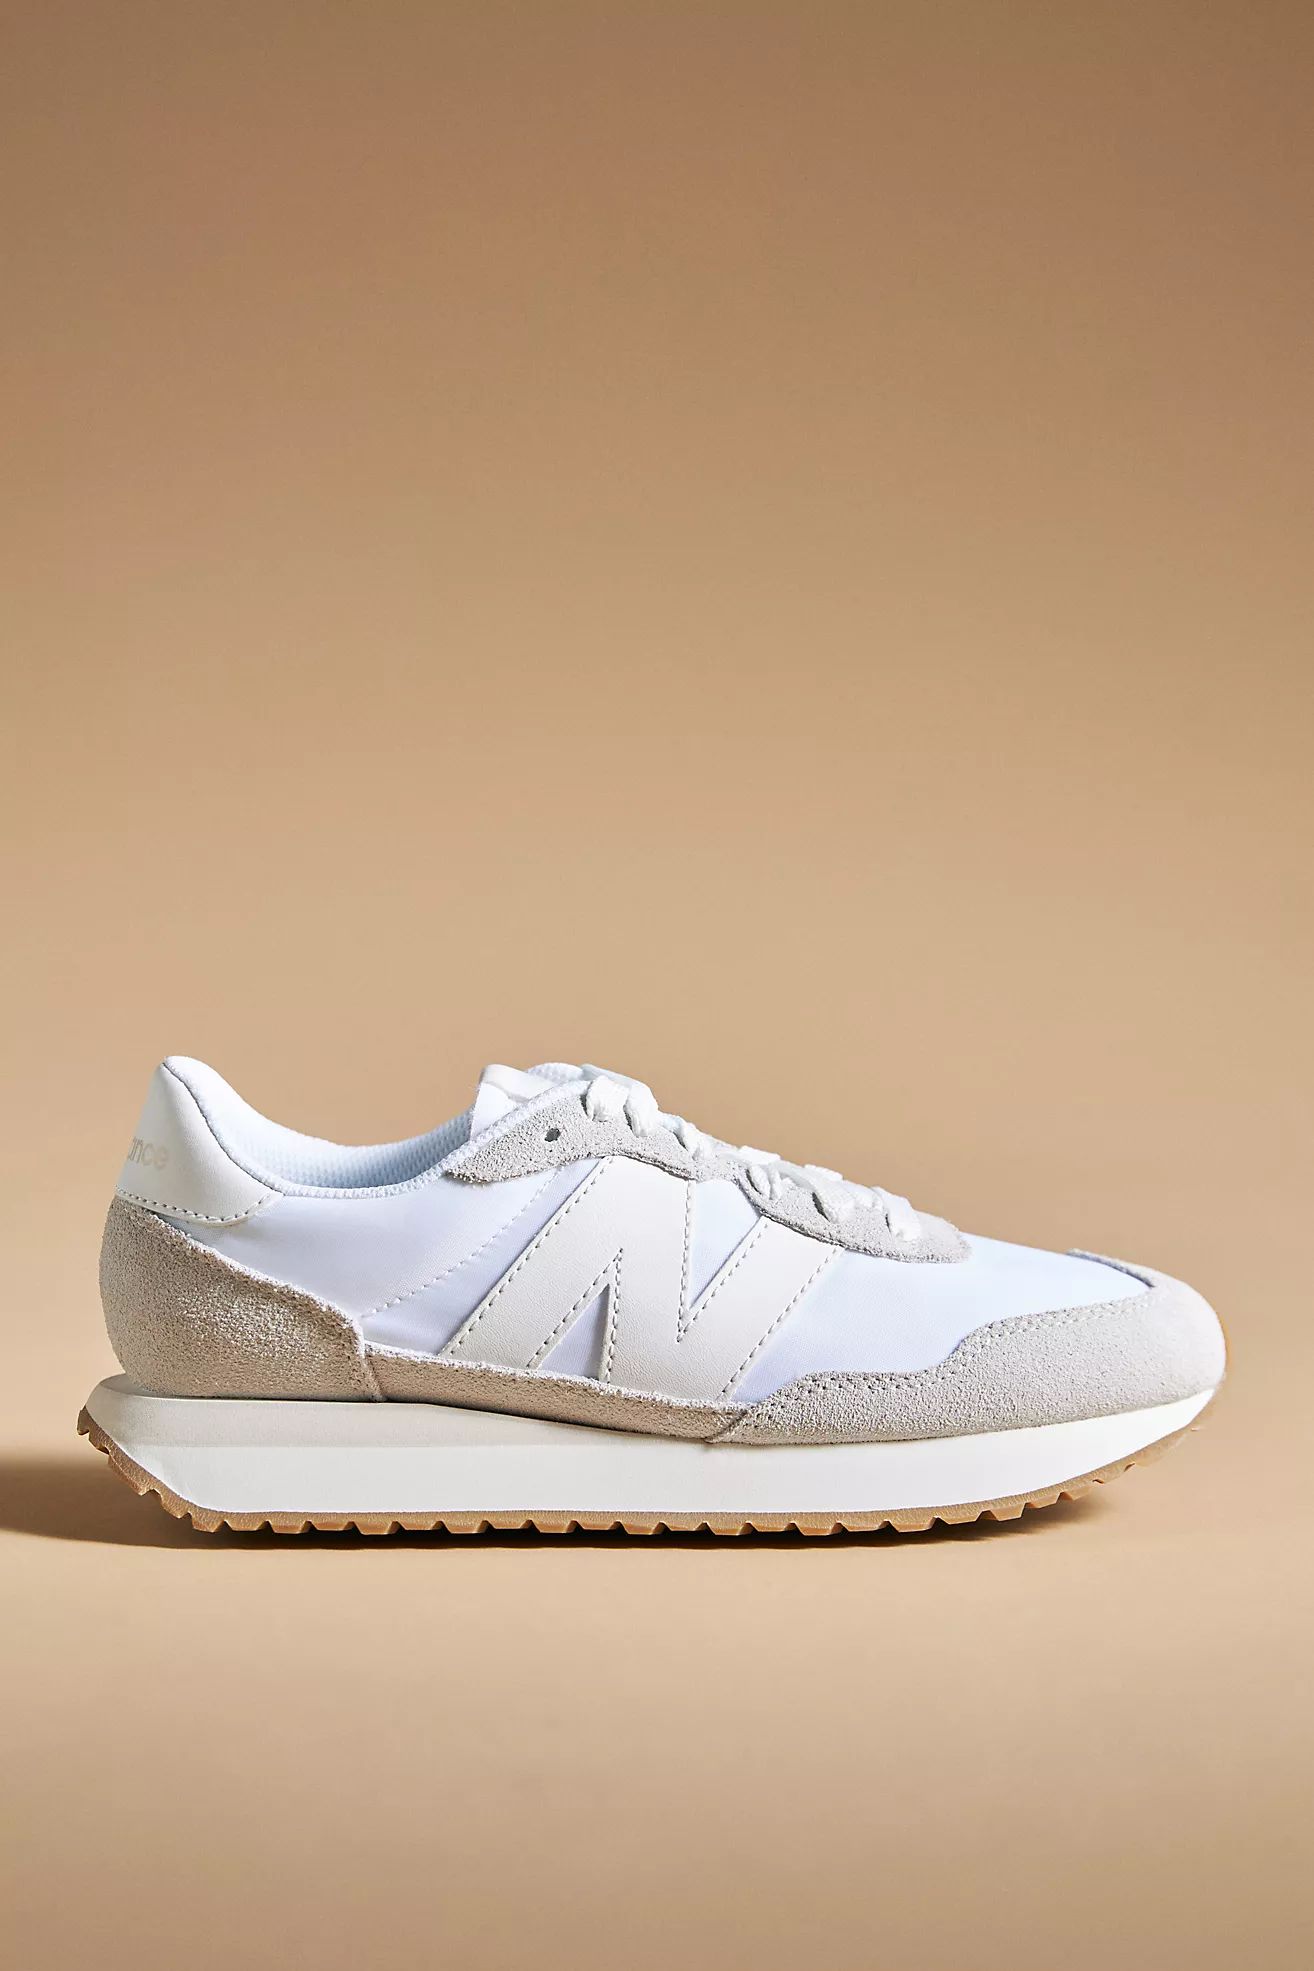 New Balance 237 Sneakers | Anthropologie (US)